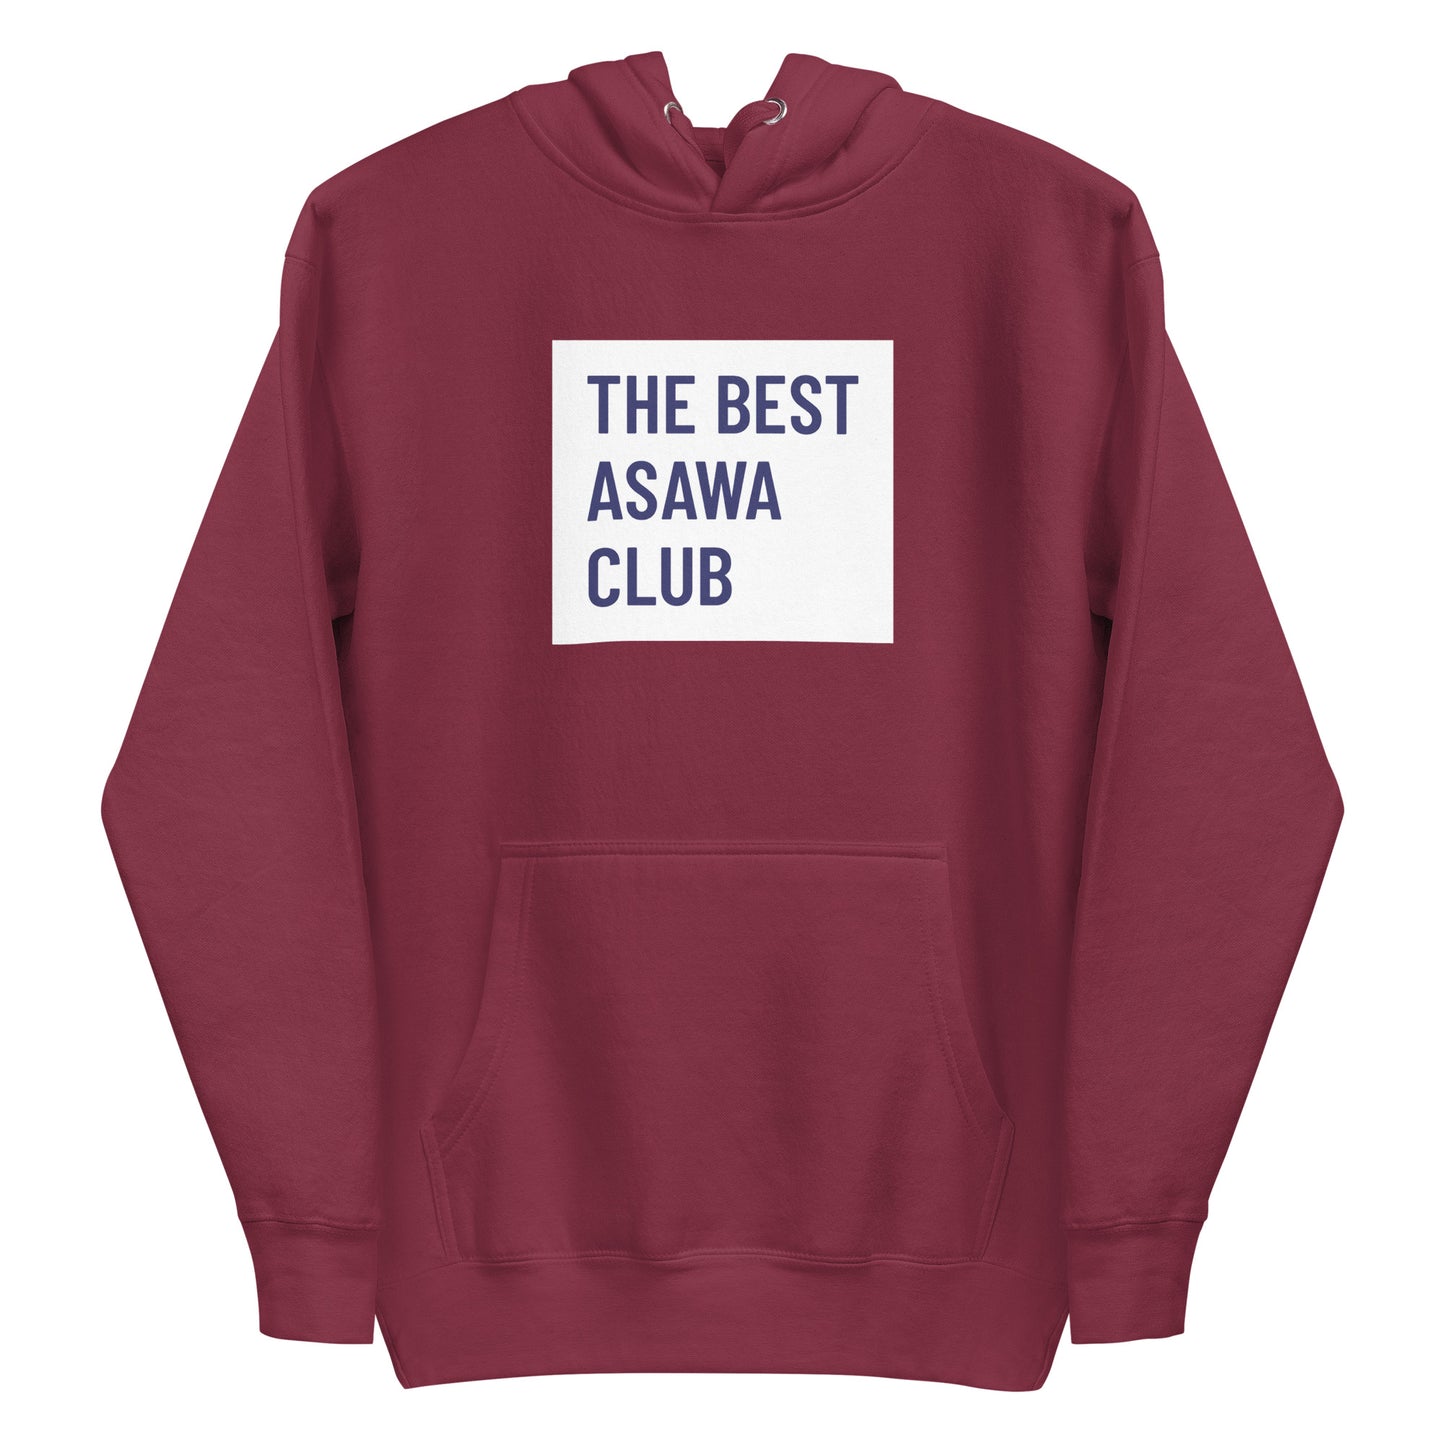 Filipino Hoodie Best Asawa Club Valentine's Day Gift Couple Merch in color variant Maroon